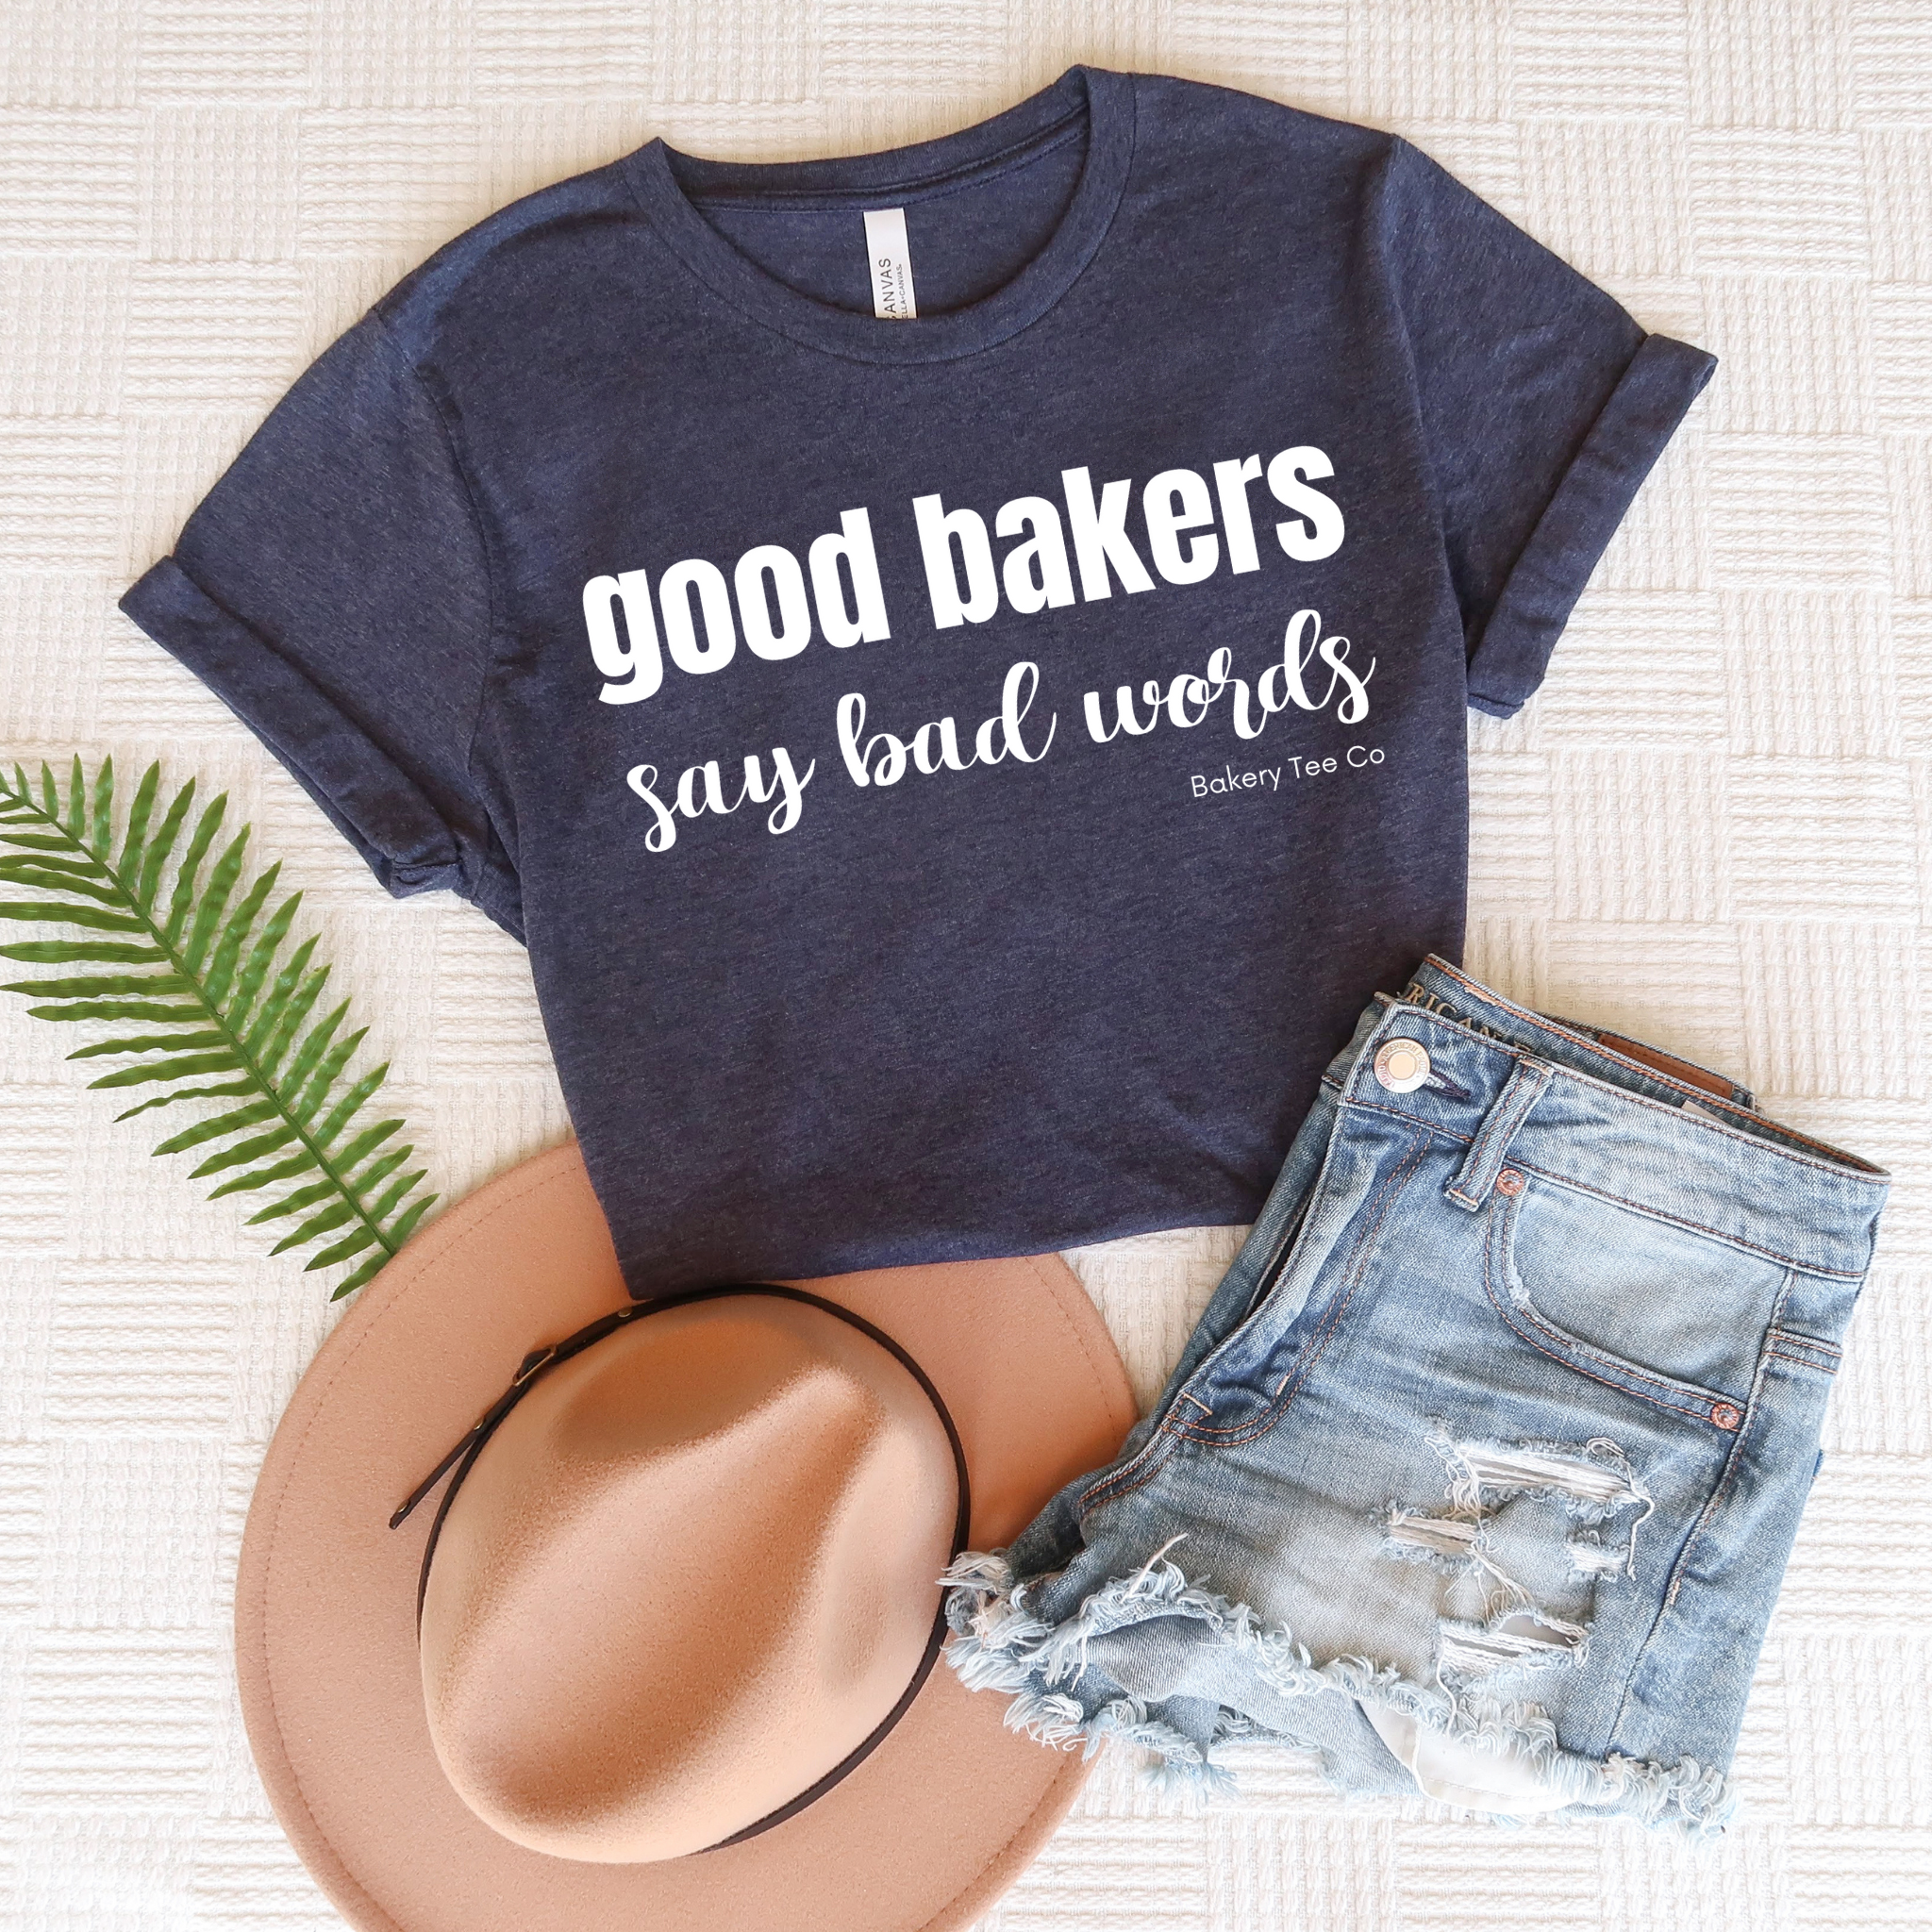 Good Bakers Say Bad Words (multiple colors)